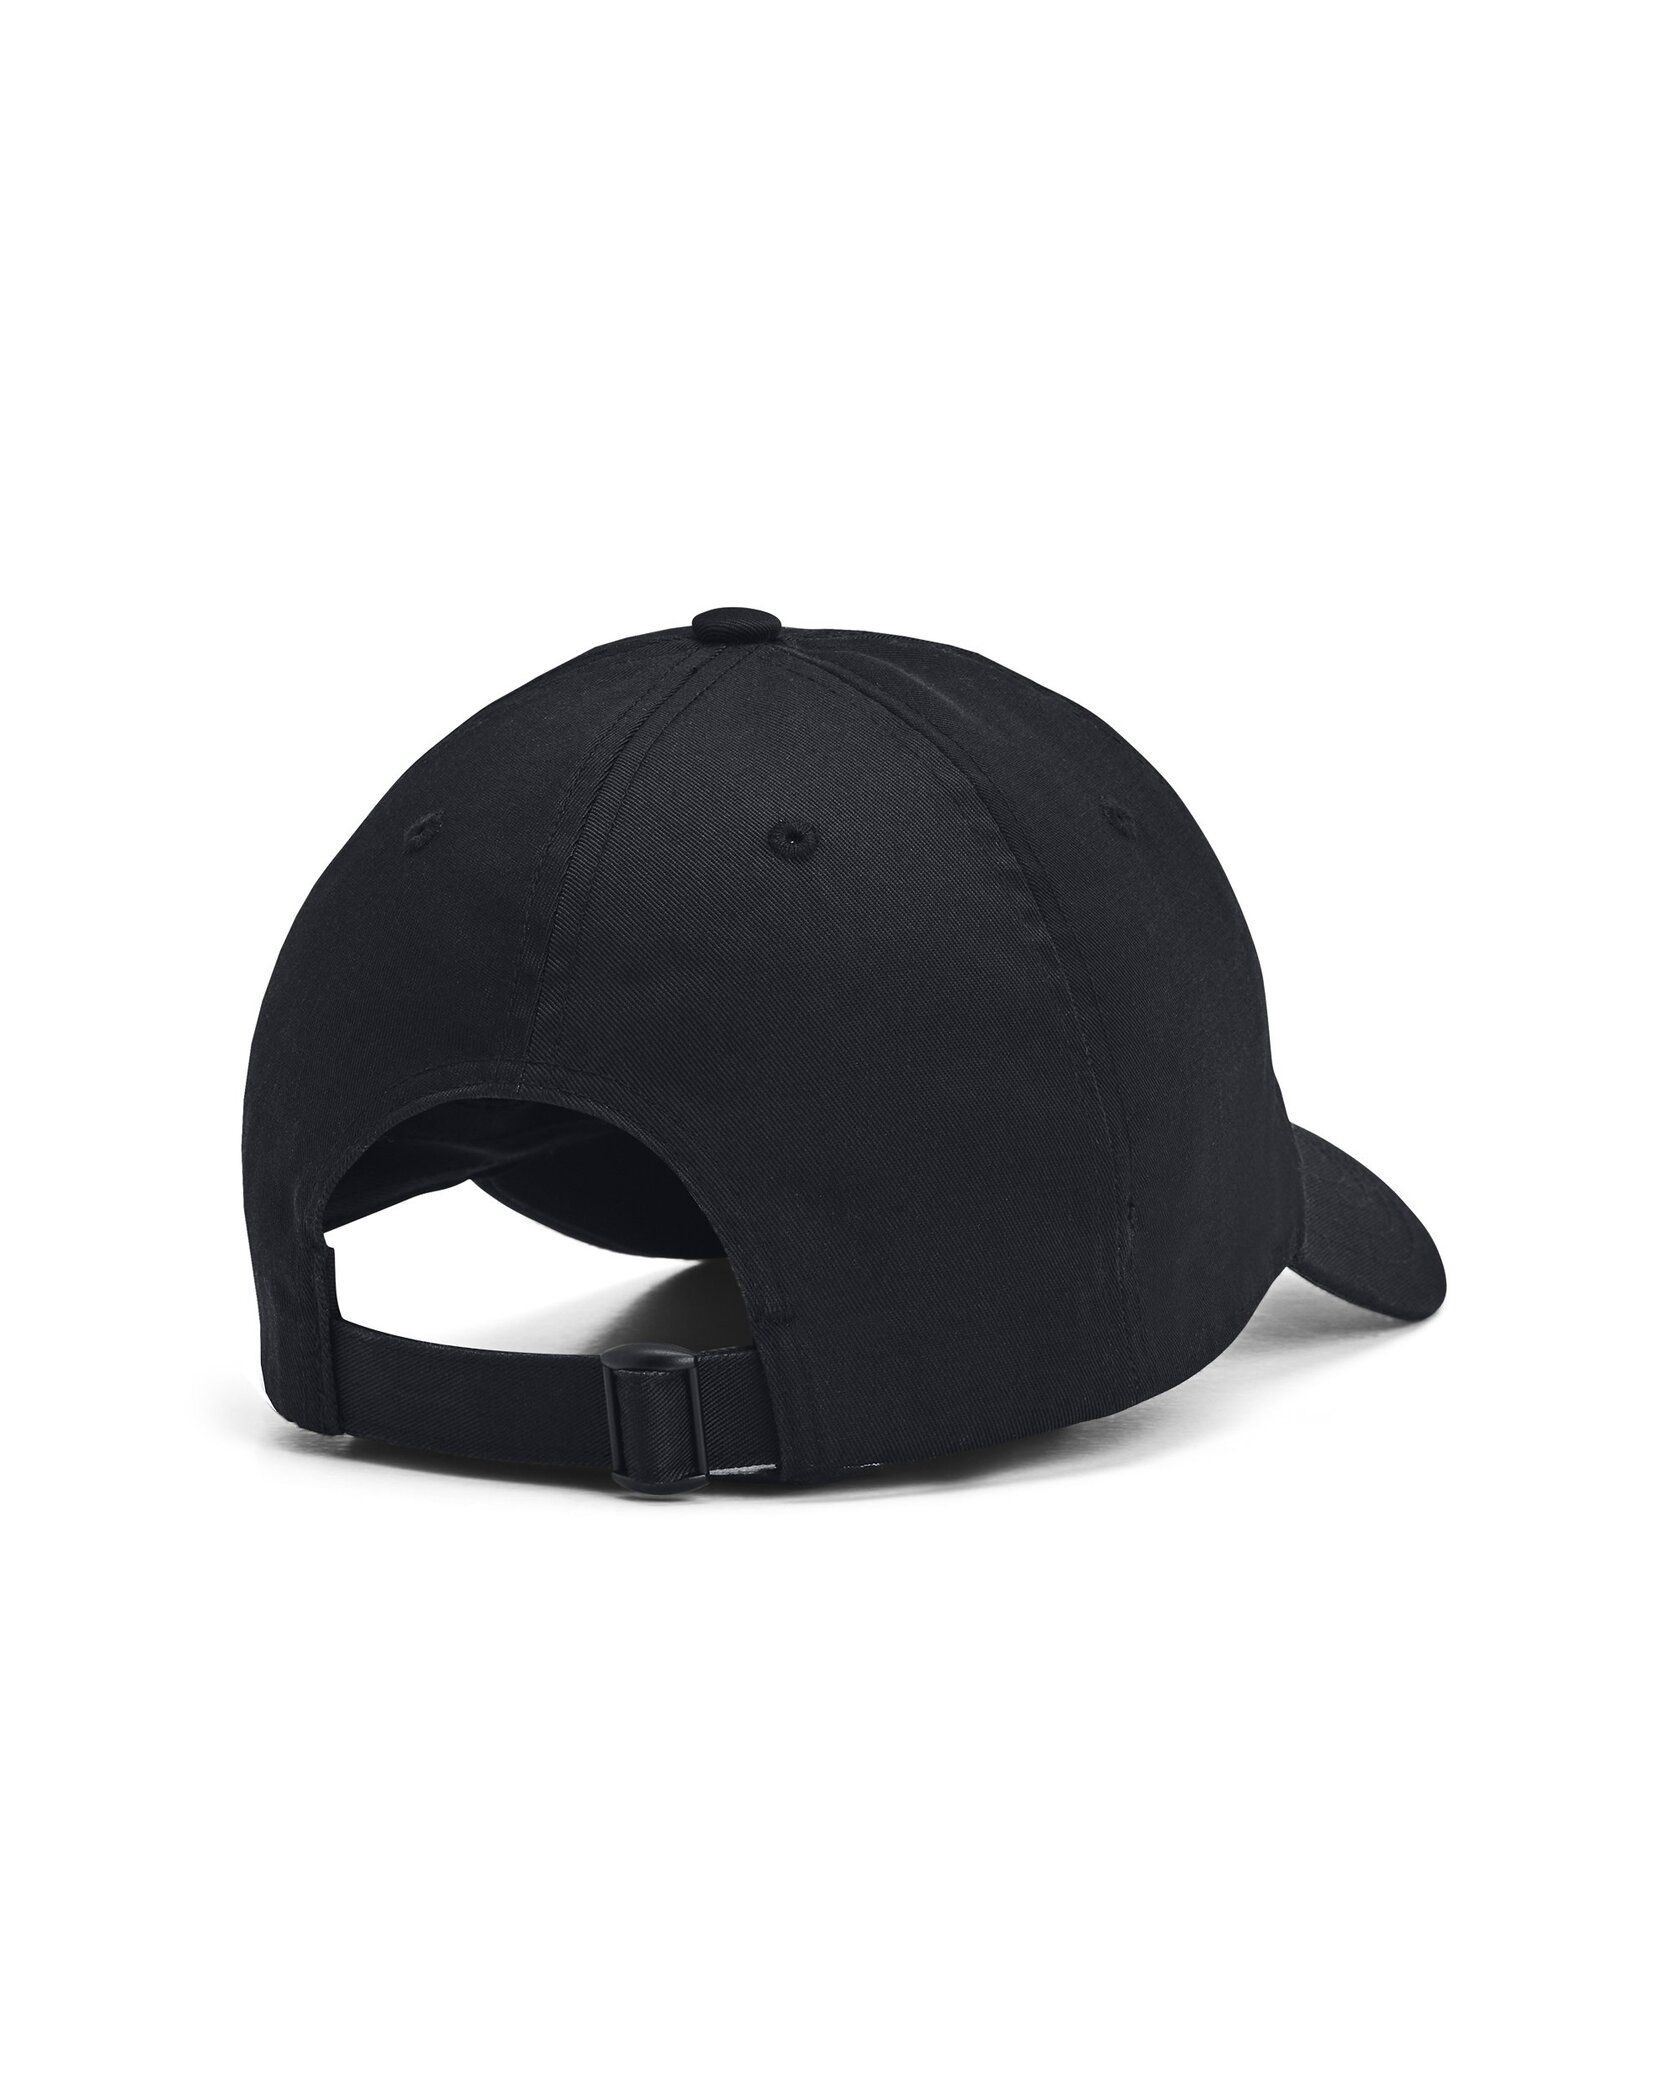 UNDER ARMOUR Men UA Branded Hat (Onesize) by Myntra